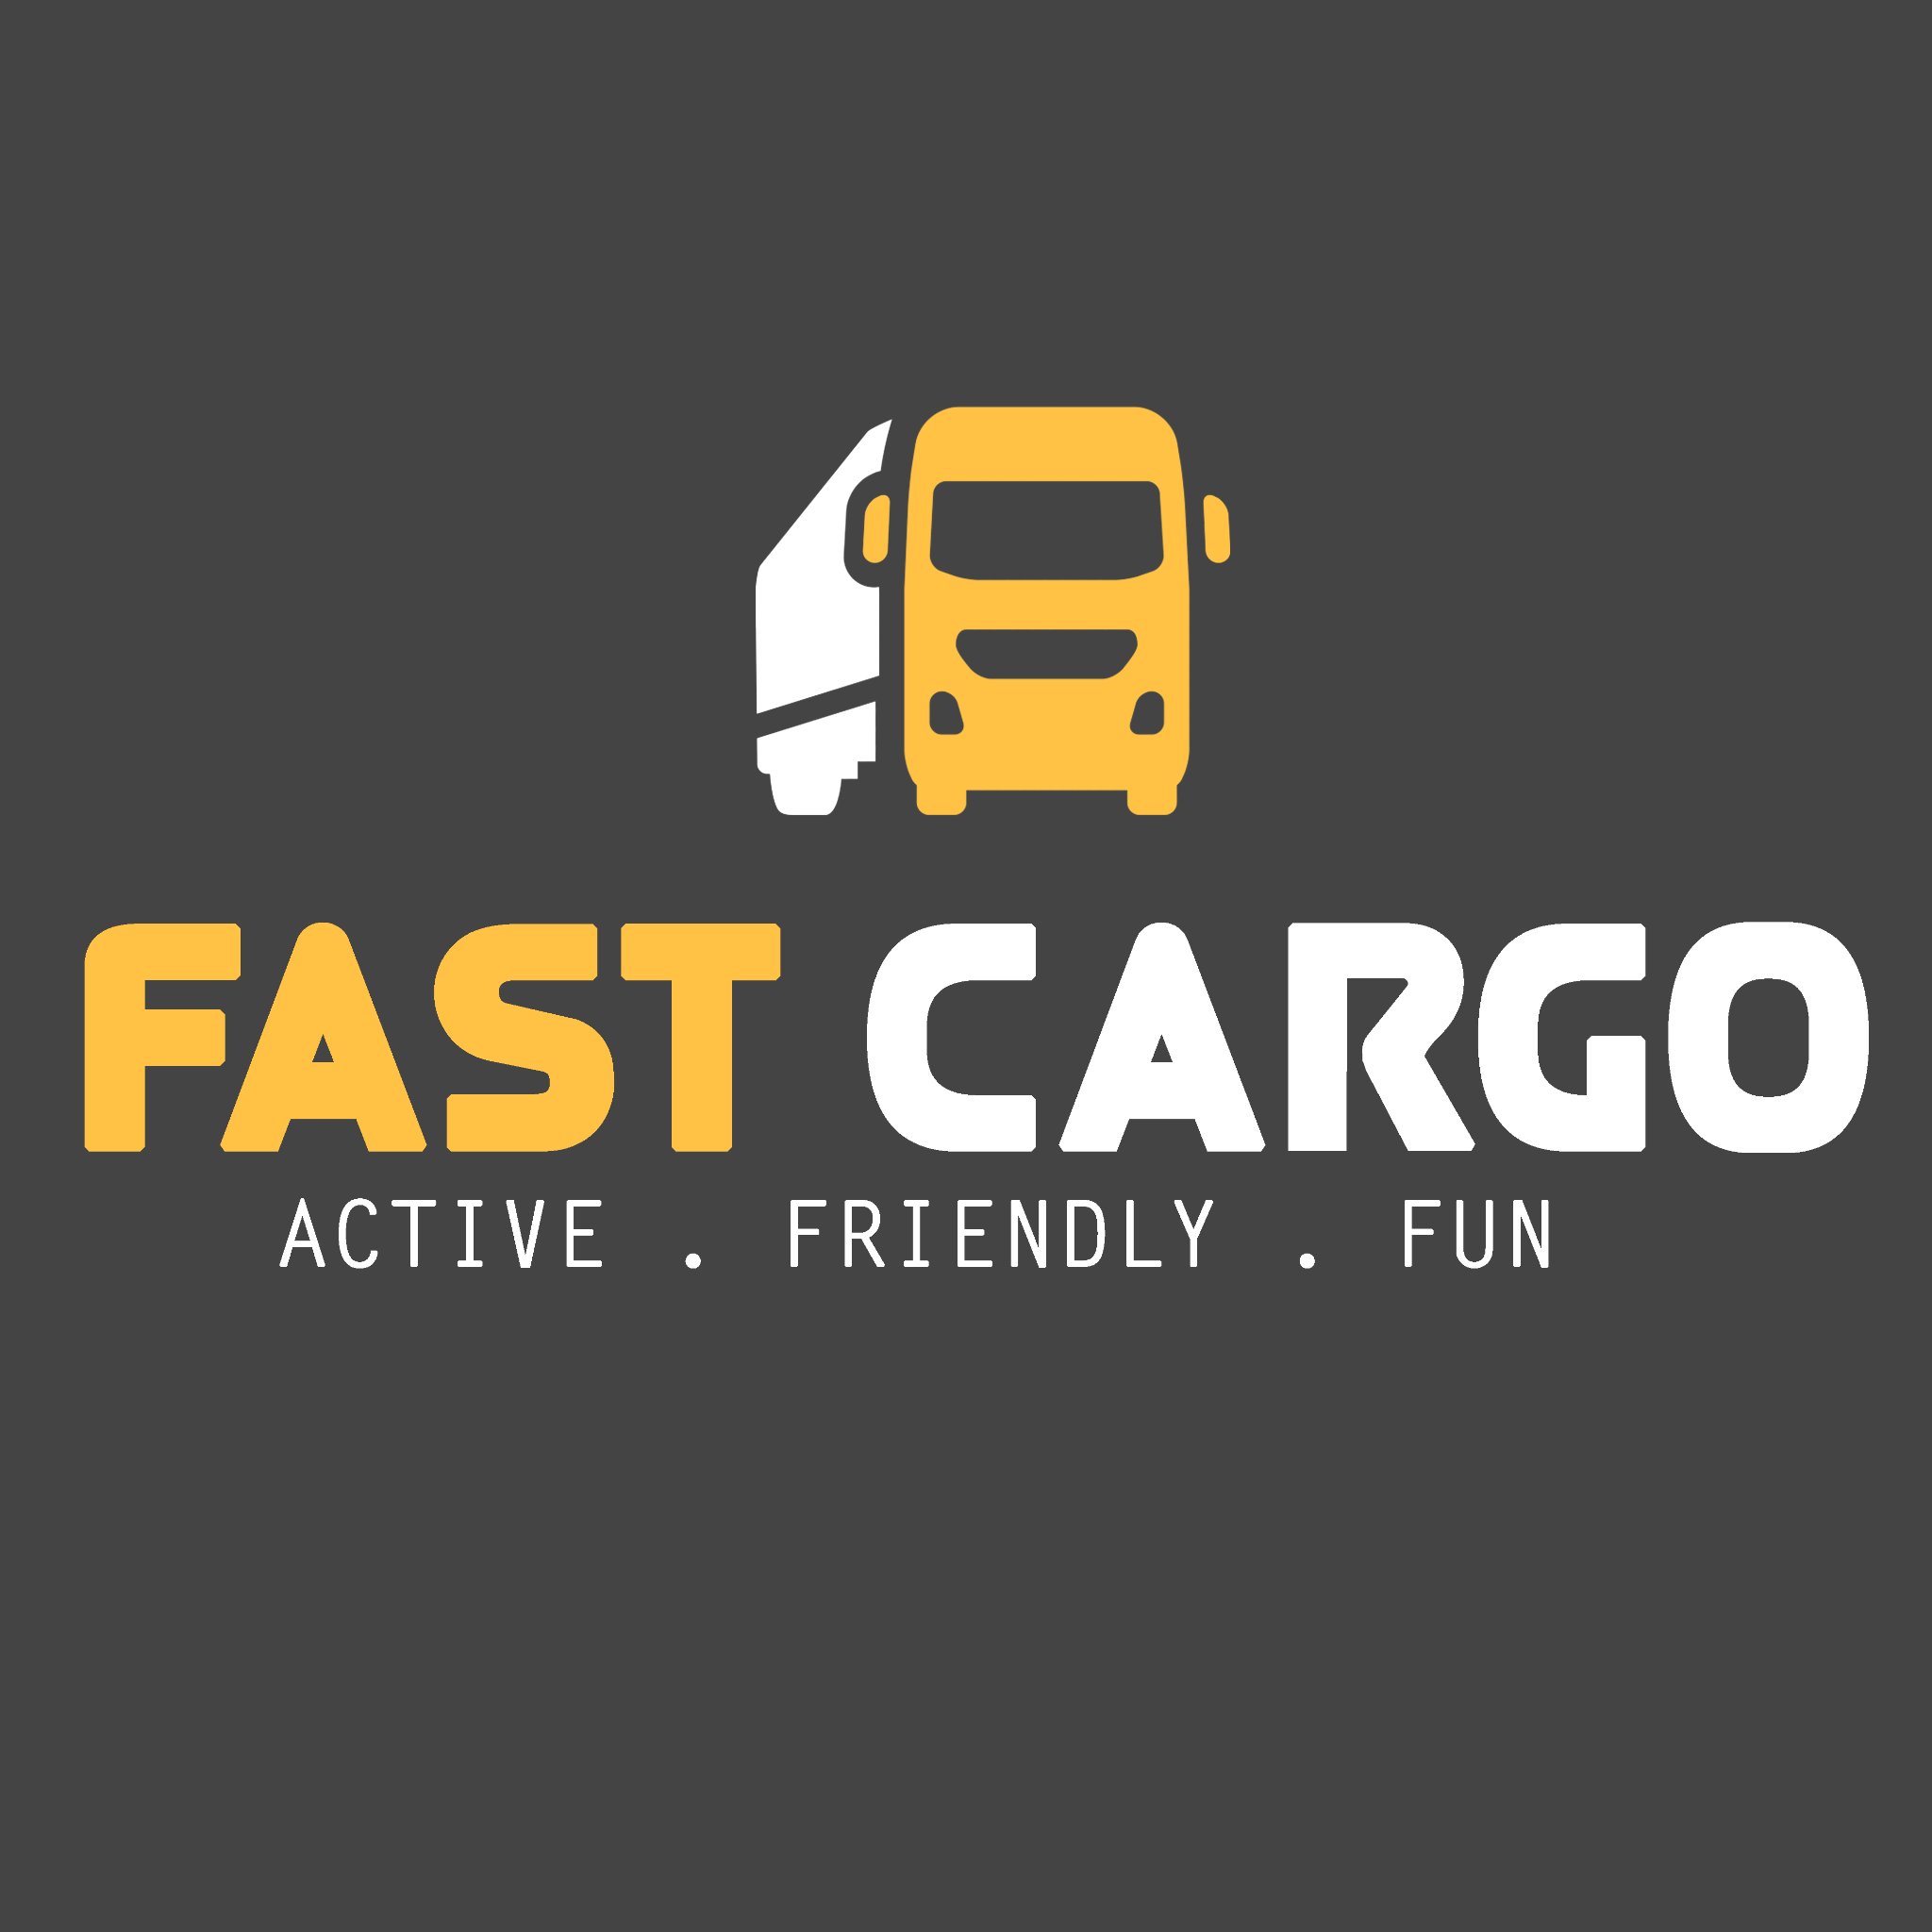 Fast Cargo VTC is a group that strives to make everyone’s experience fun, realistic, and enjoyable!